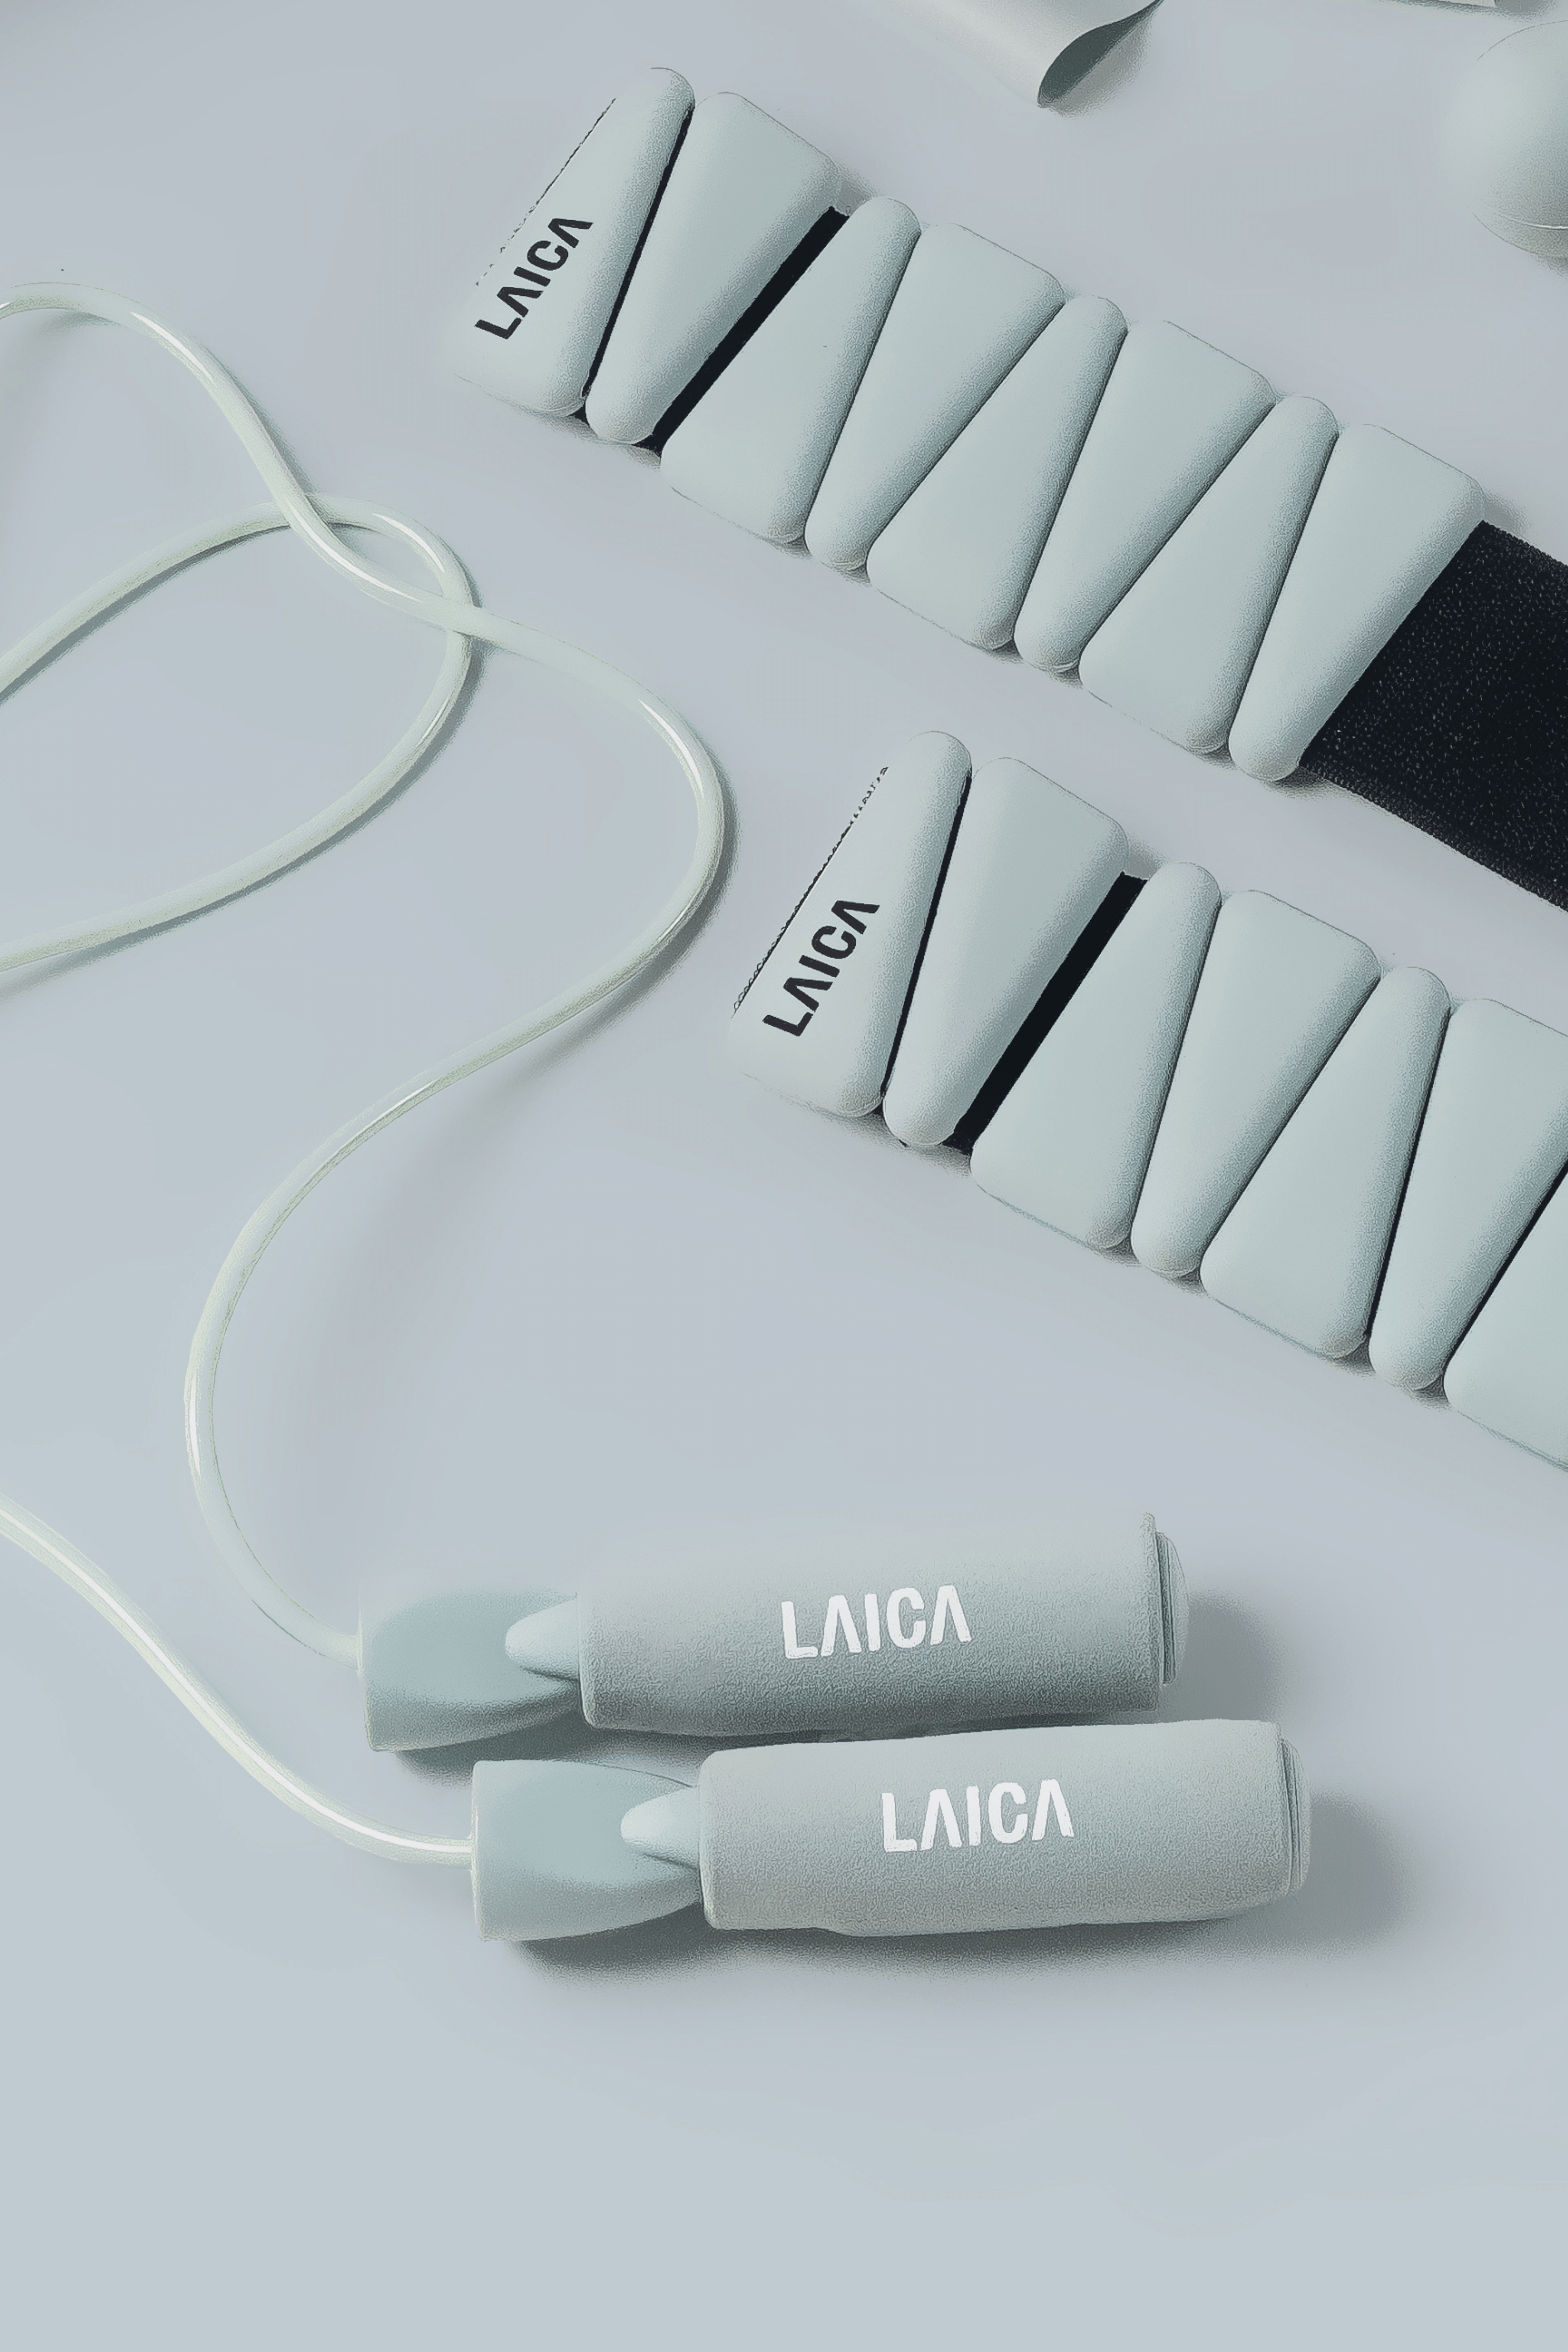 LAICA Jump Rope - Silver Blue